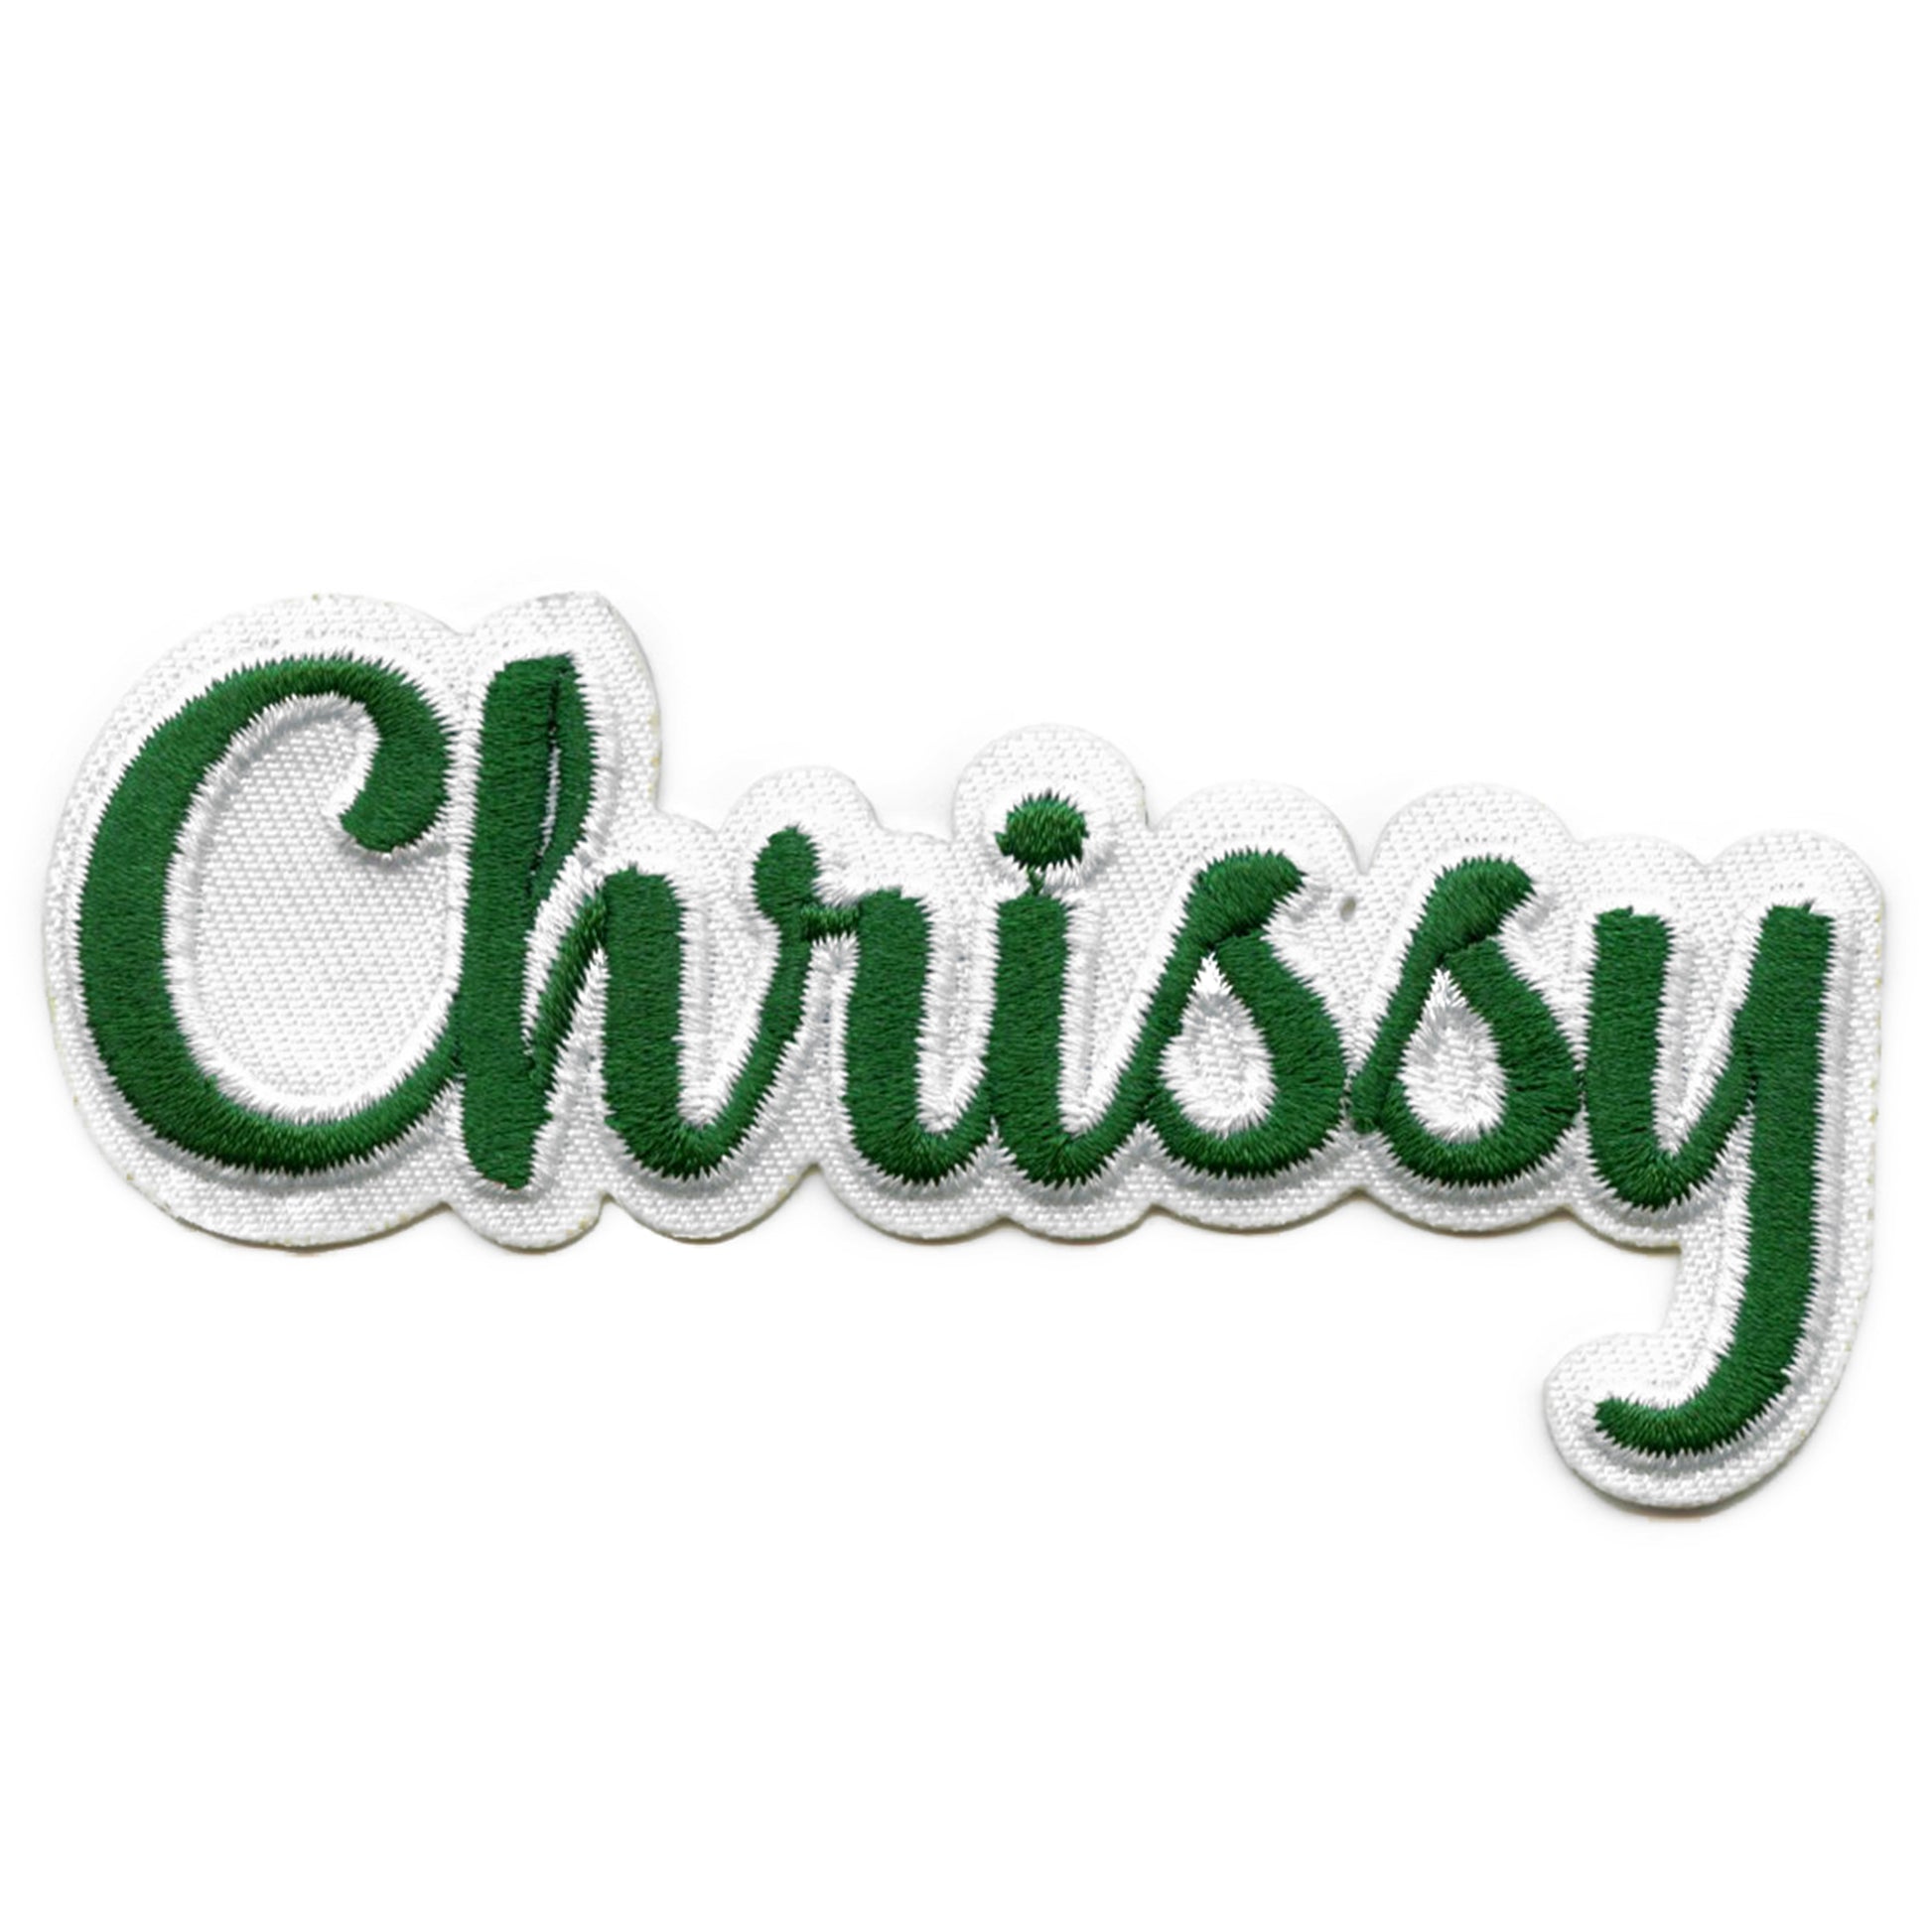 Embroider Name Patches  Wholesale Embroidery in NJ